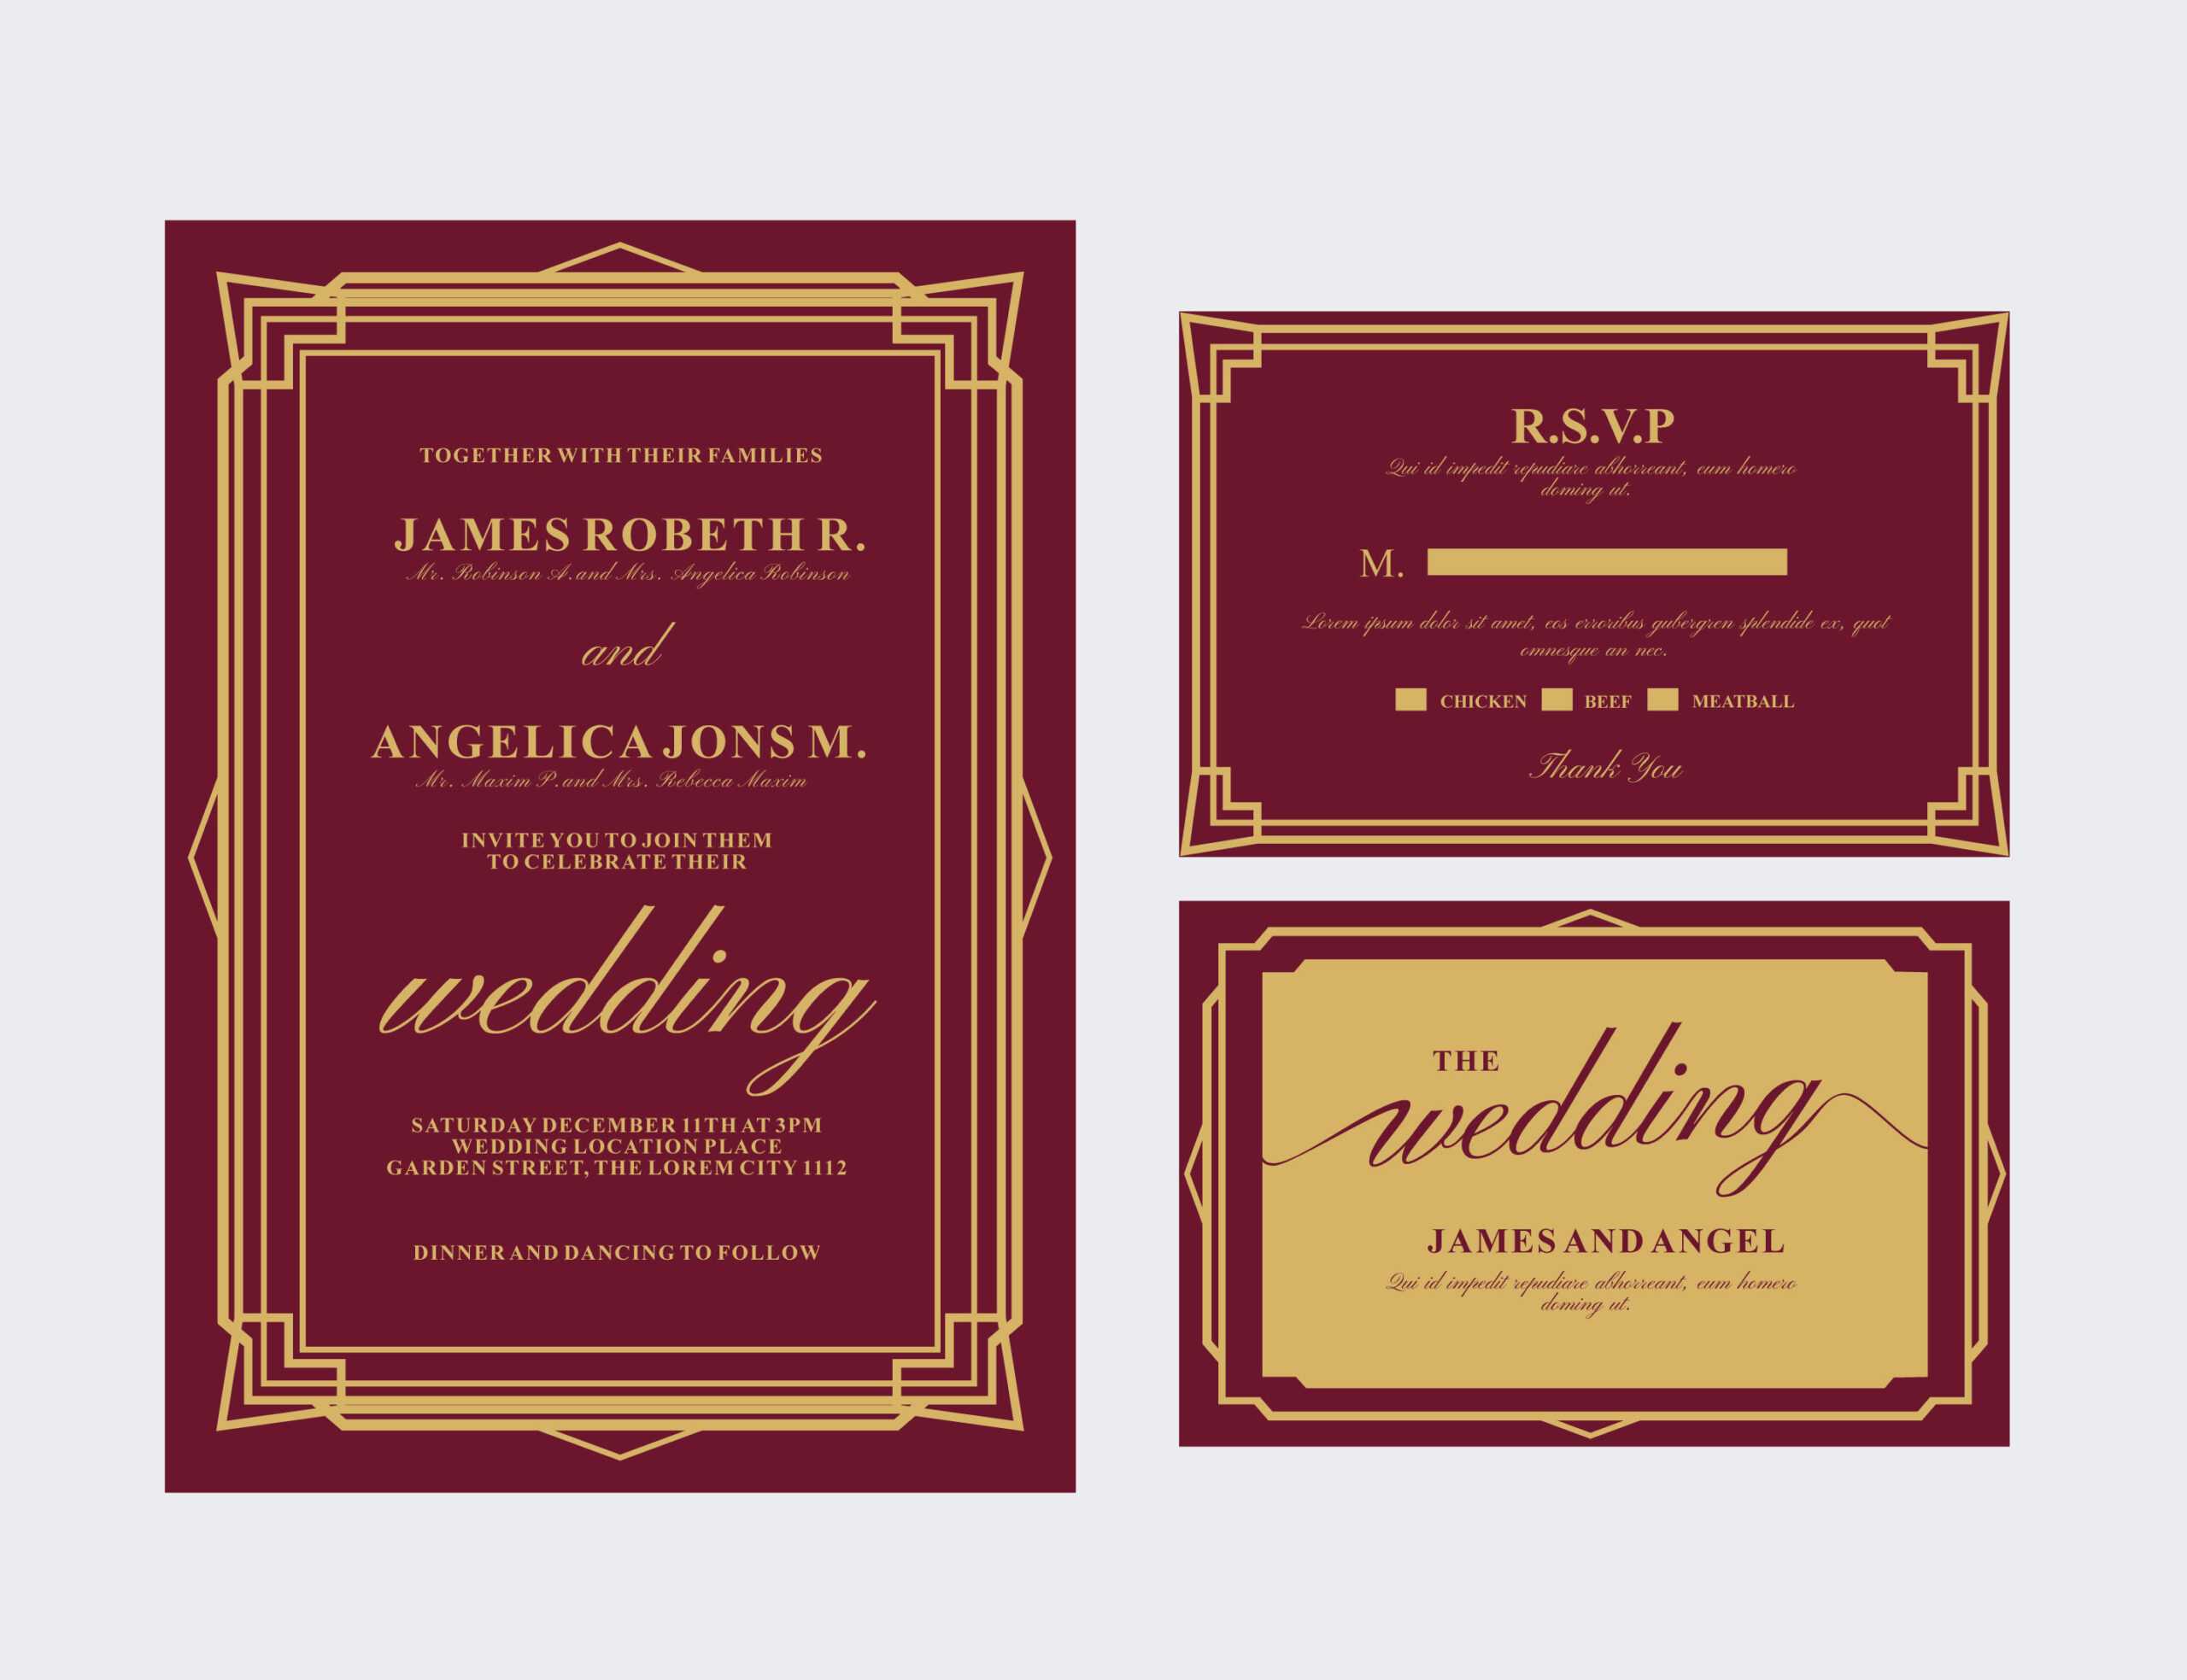 Indian Wedding Card Free Vector Art – (428 Free Downloads) With Indian Wedding Cards Design Templates